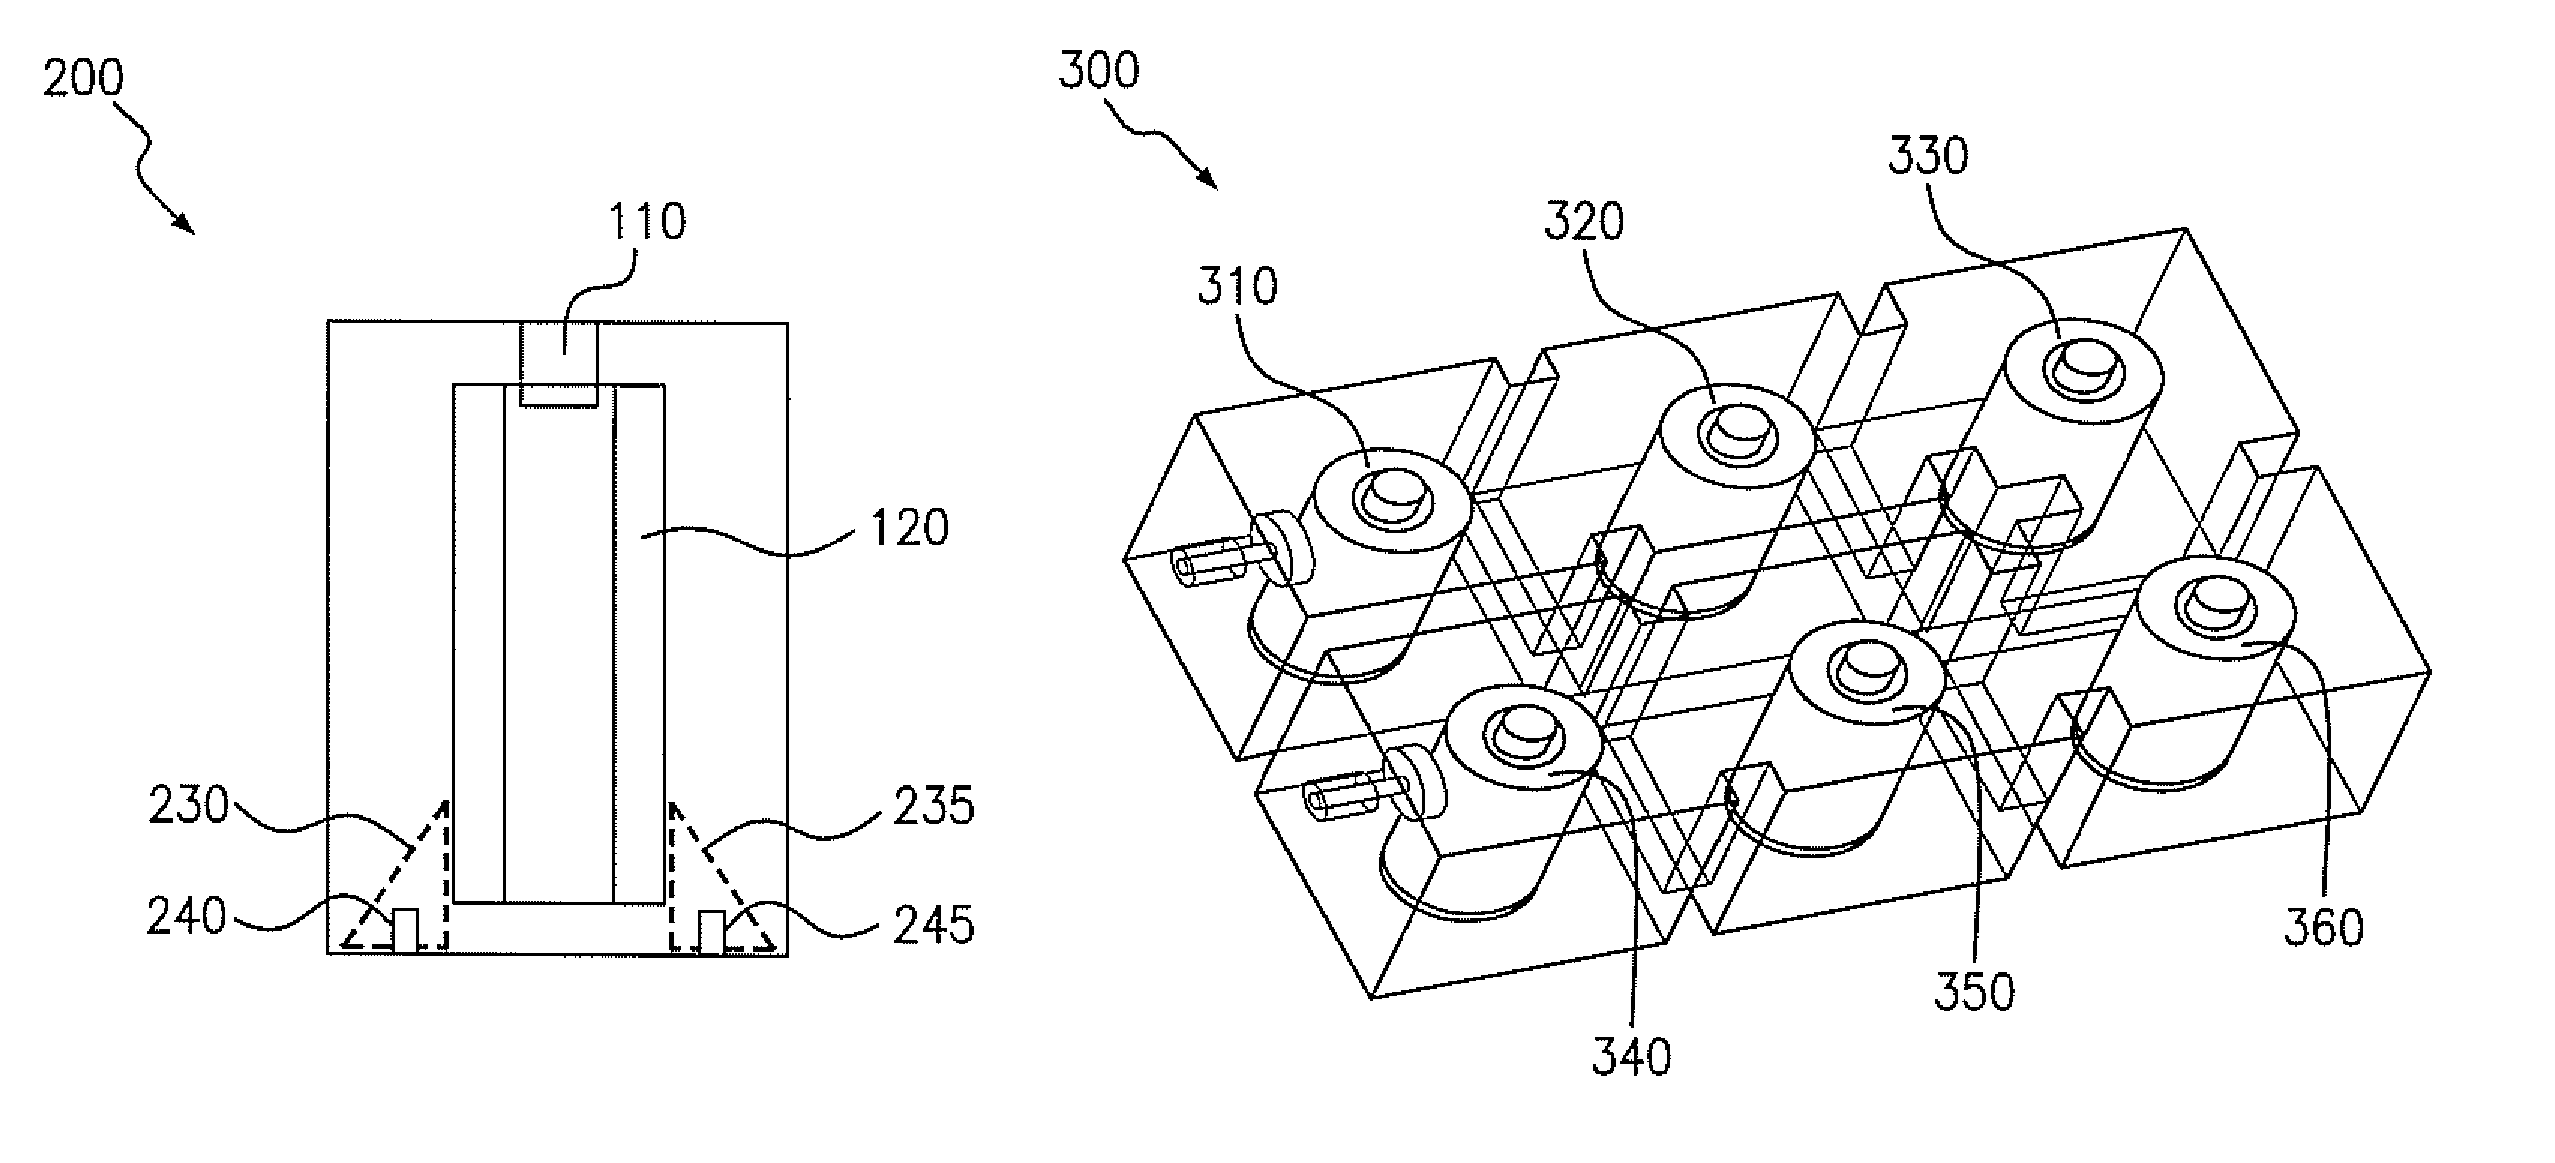 Dielectric combine cavity filter having ceramic resonator rods suspended by polymer wedge mounting structures